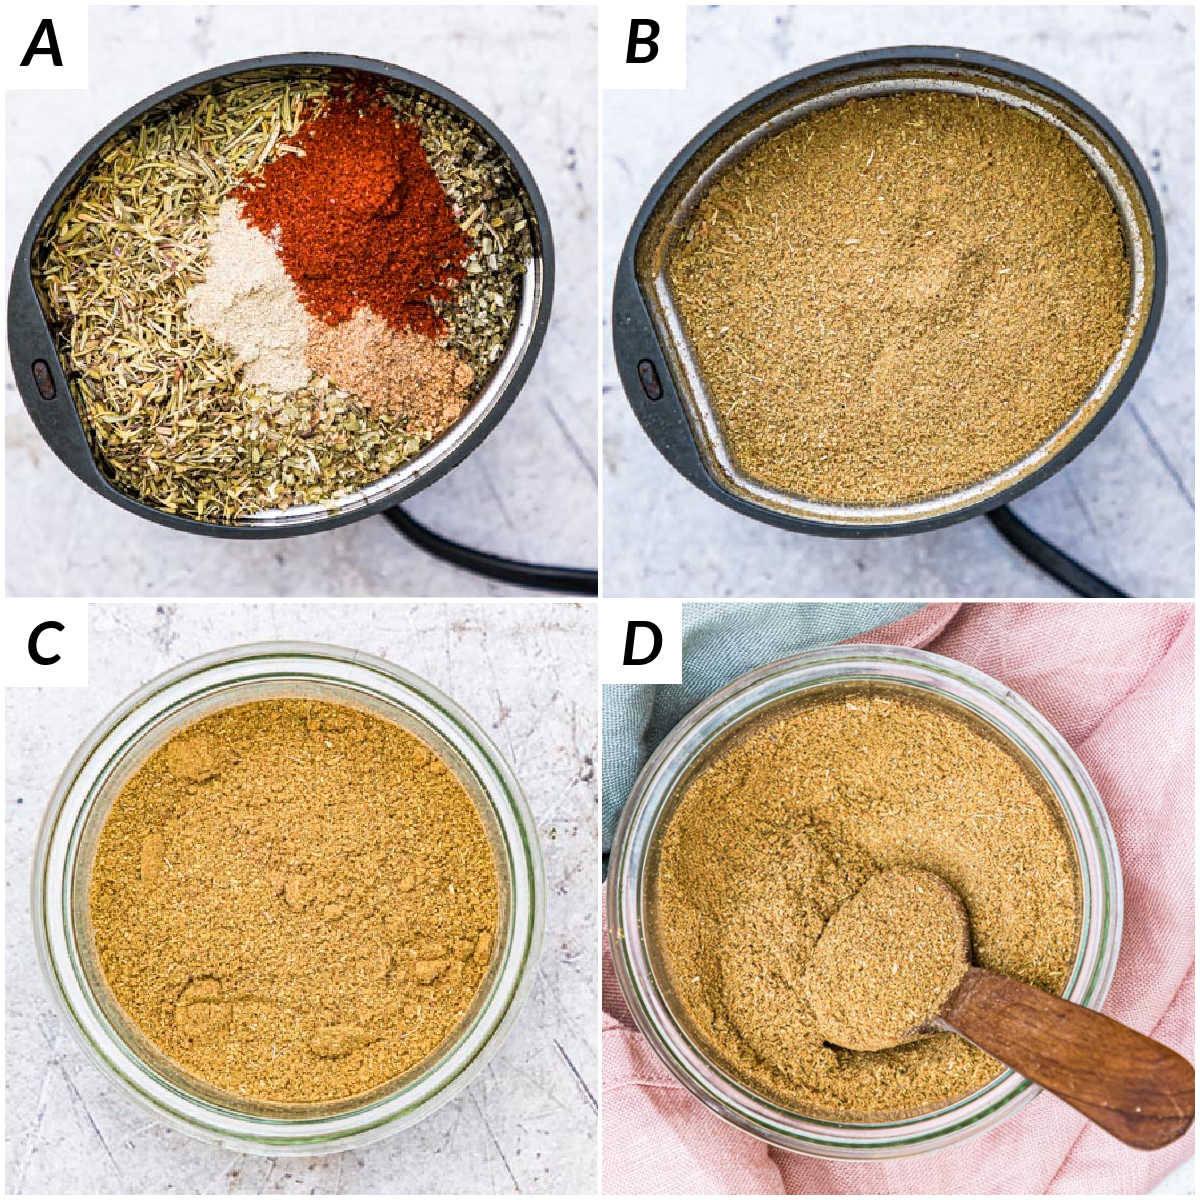 image collage showing the steps for making homemade poultry seasoning